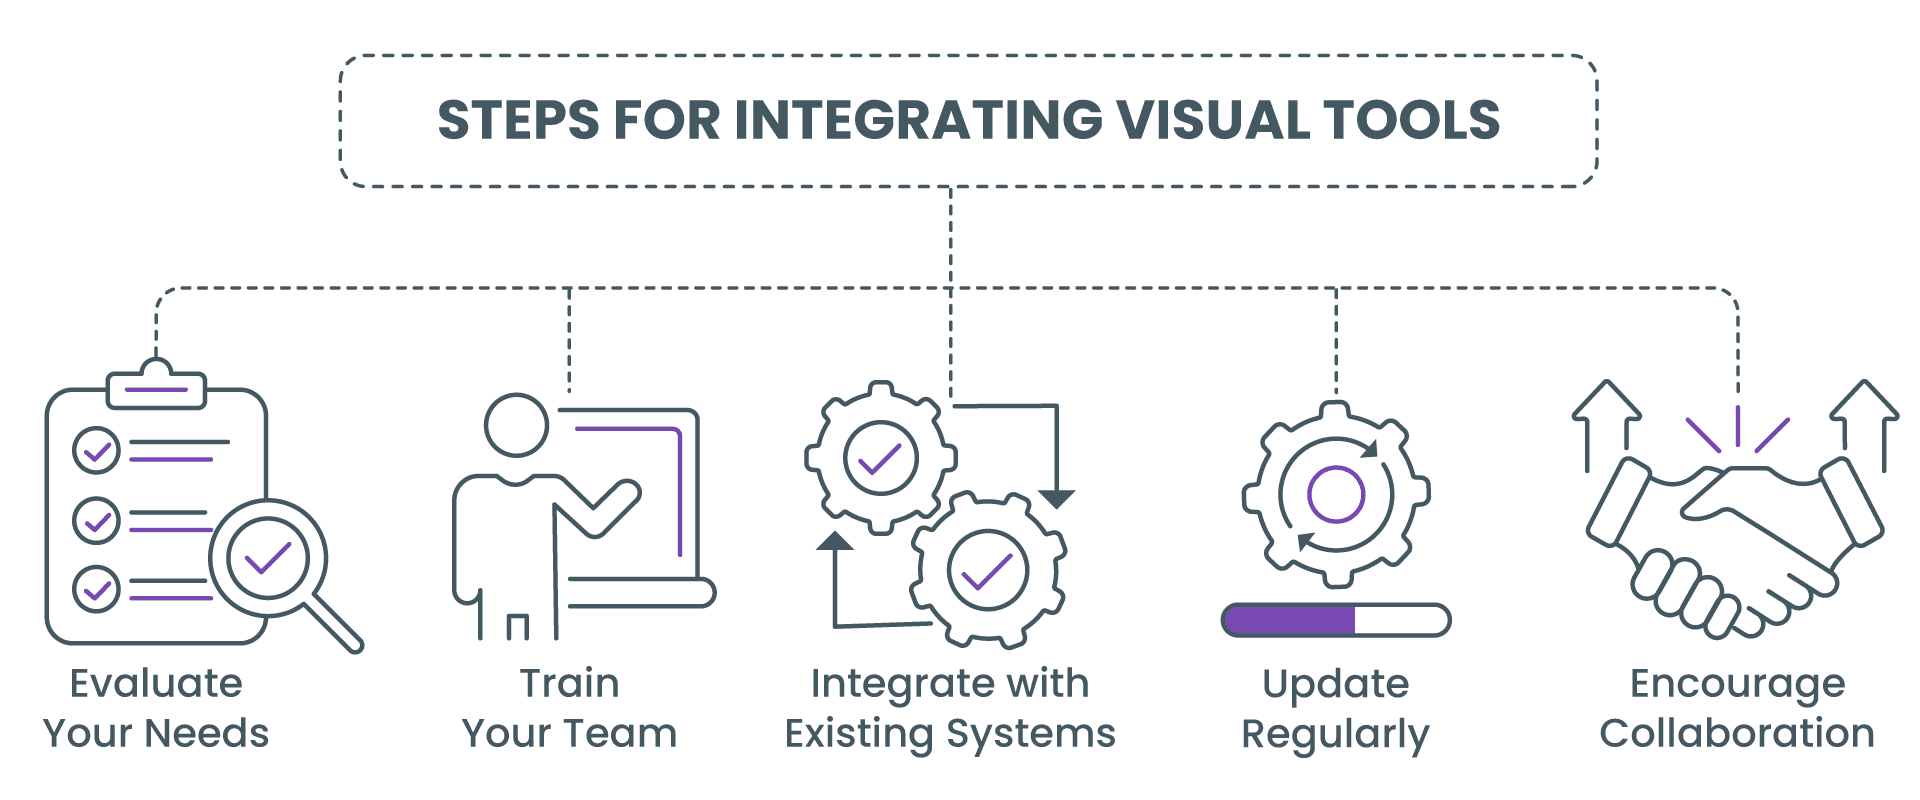 Integrating Visual Tools into Your Workflow